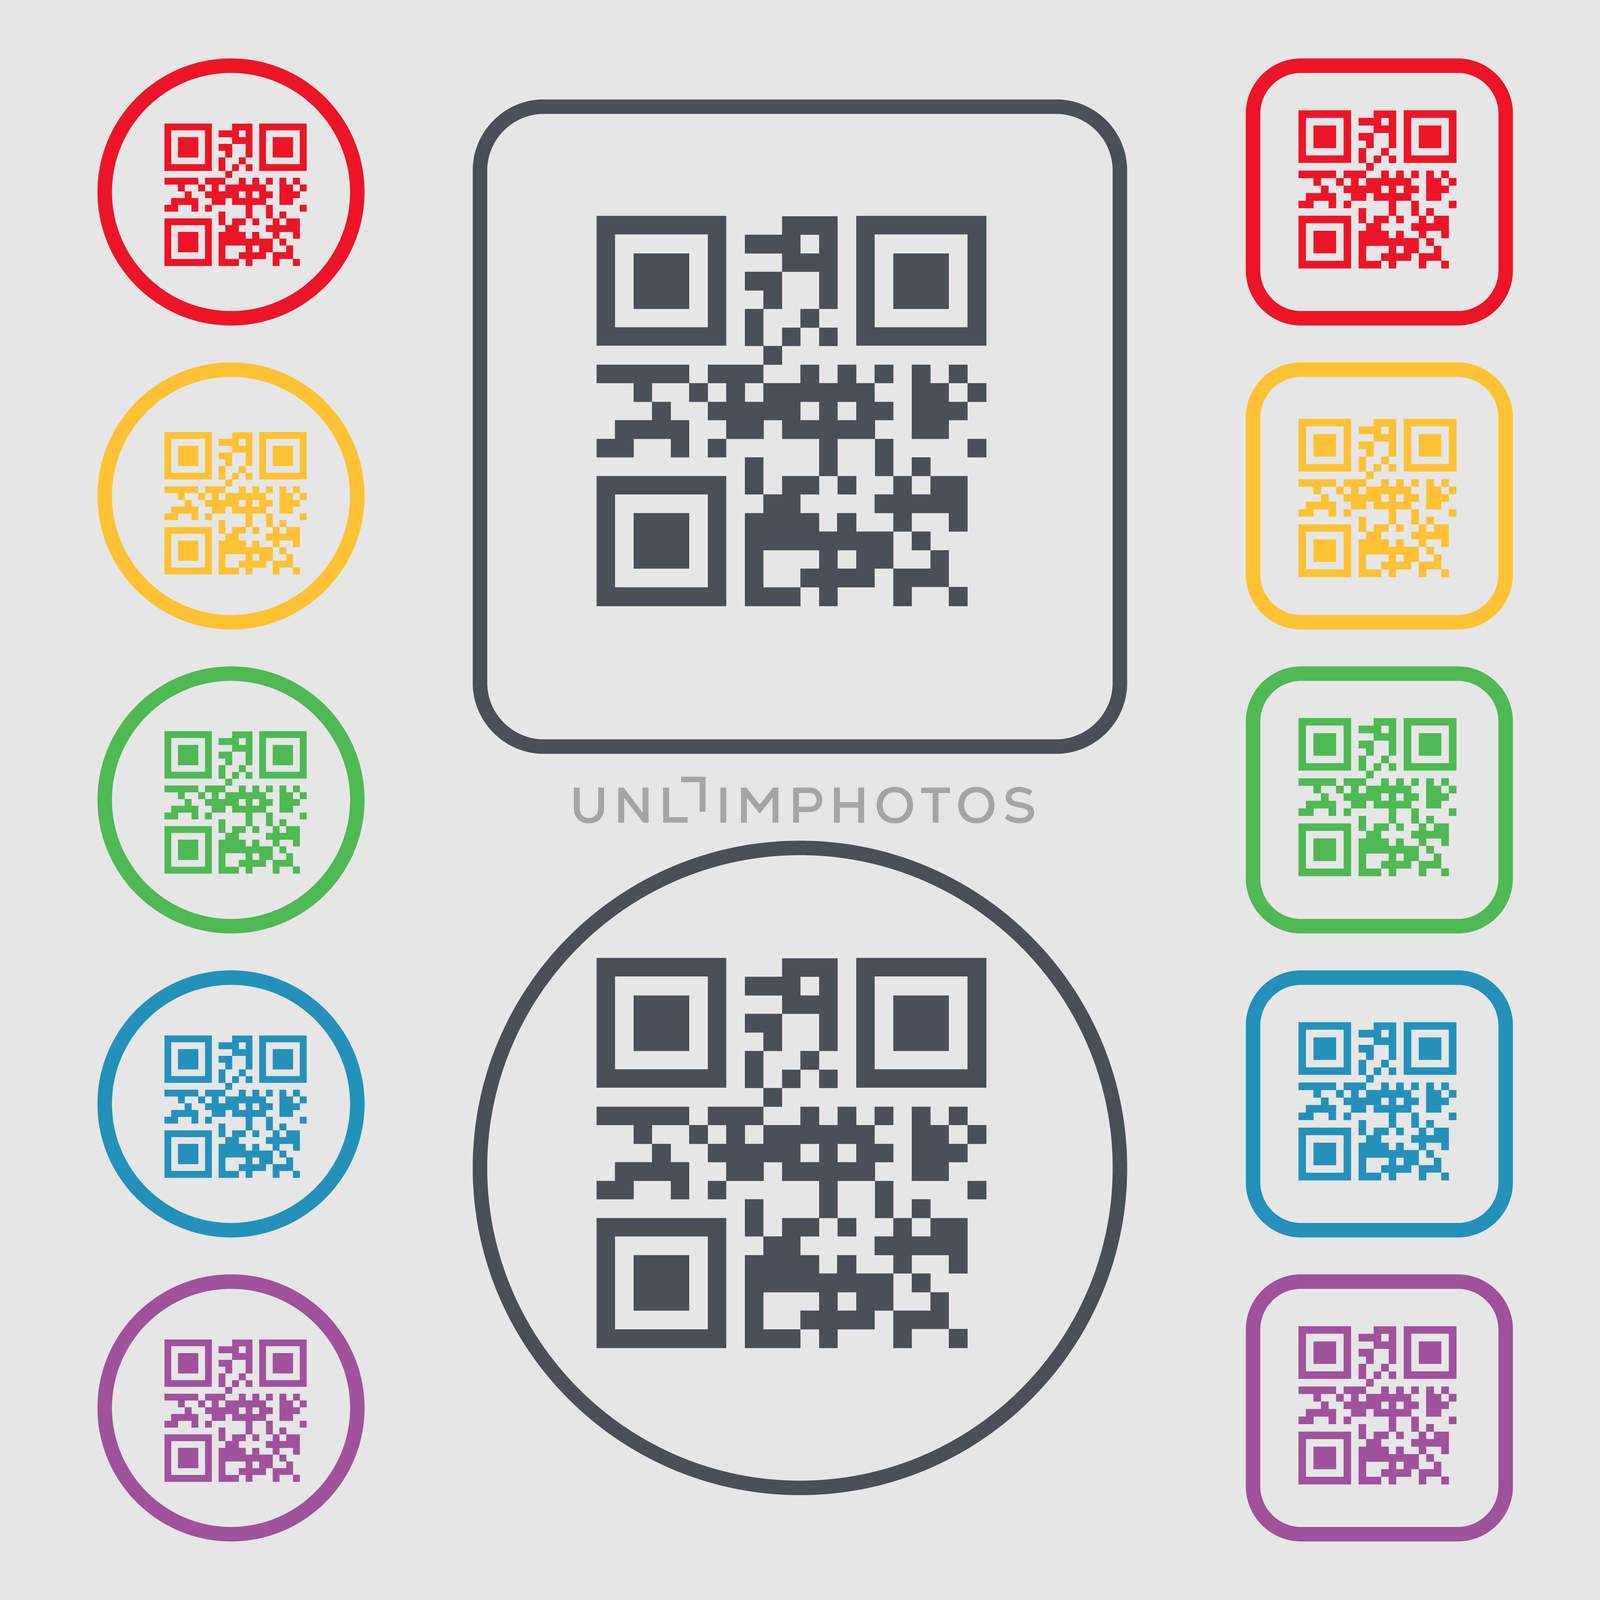 Qr code icon sign. symbol on the Round and square buttons with frame. illustration